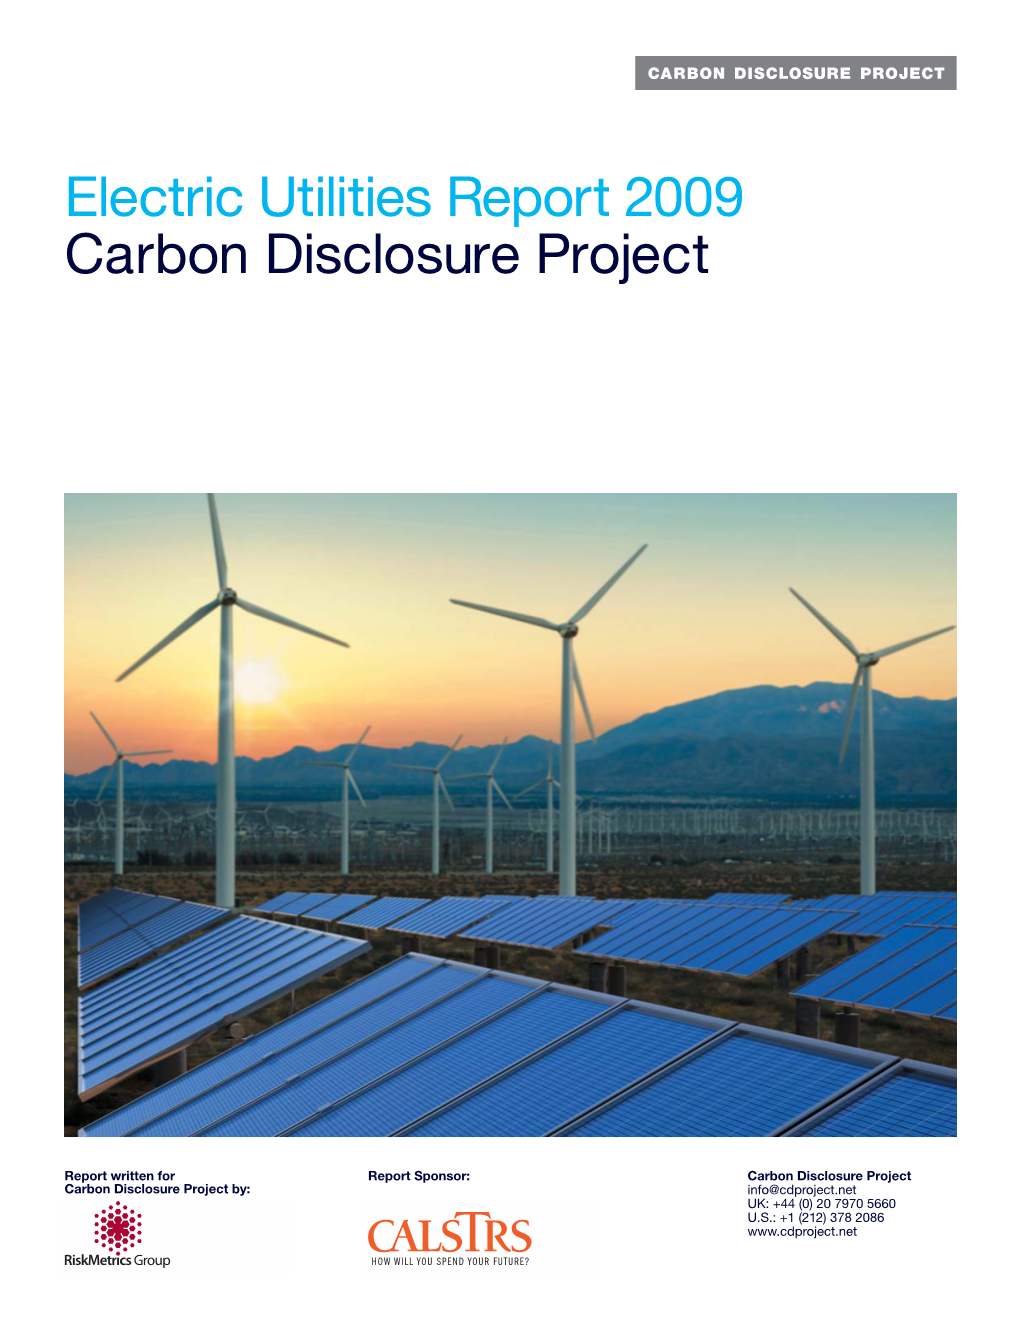 Electric Utilities Report 2009 Carbon Disclosure Project